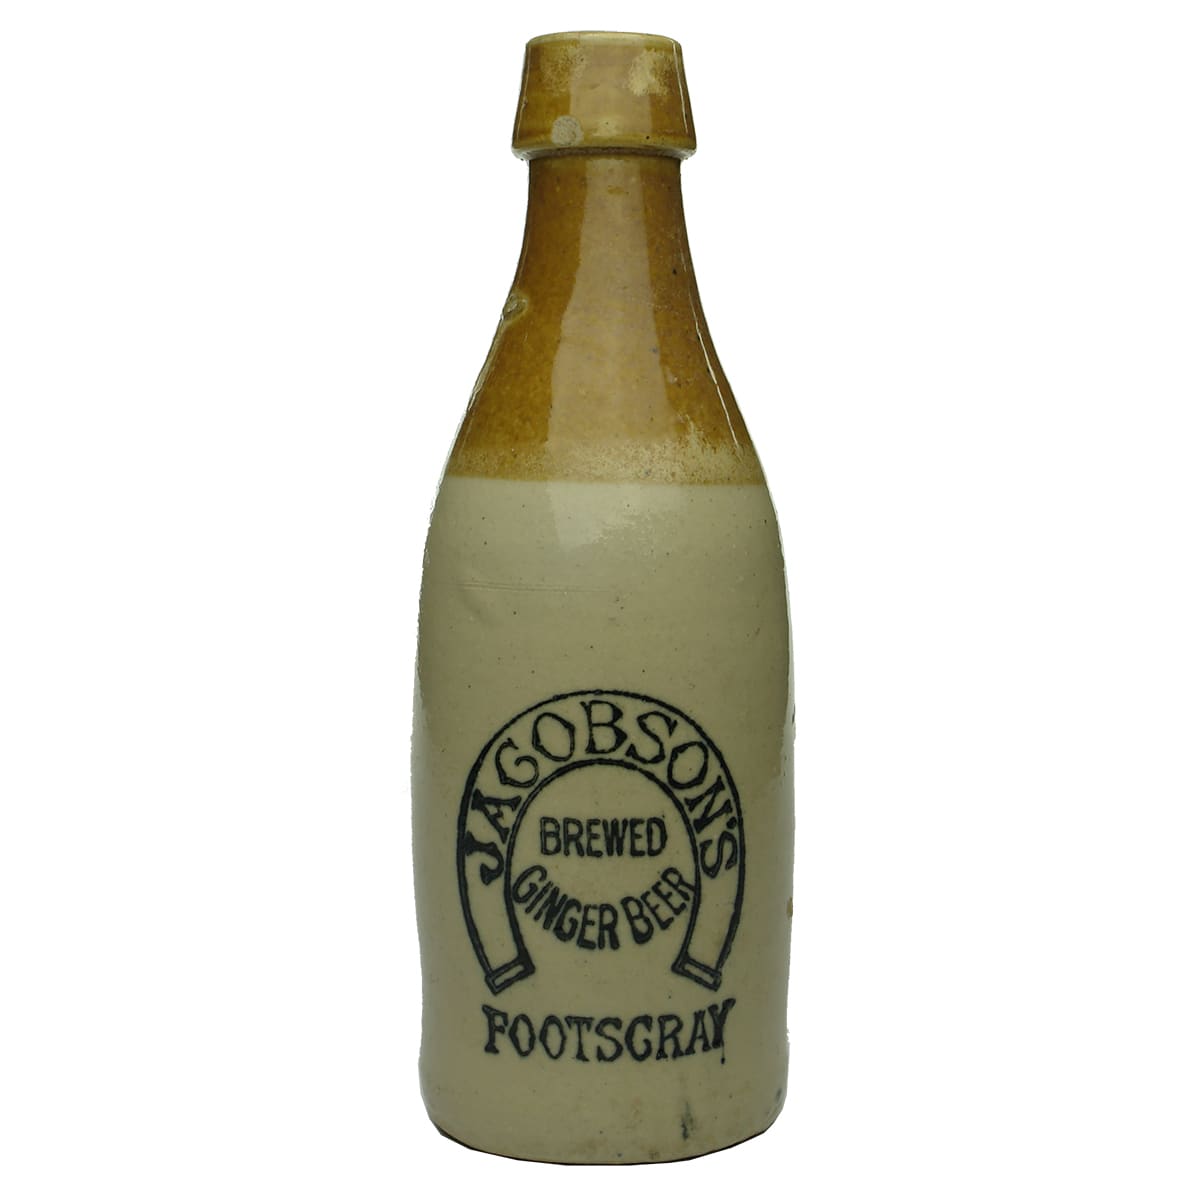 Ginger Beer. Jacobson's, Footscray. Champagne. Tan Top. Cork Stopper. (Victoria)